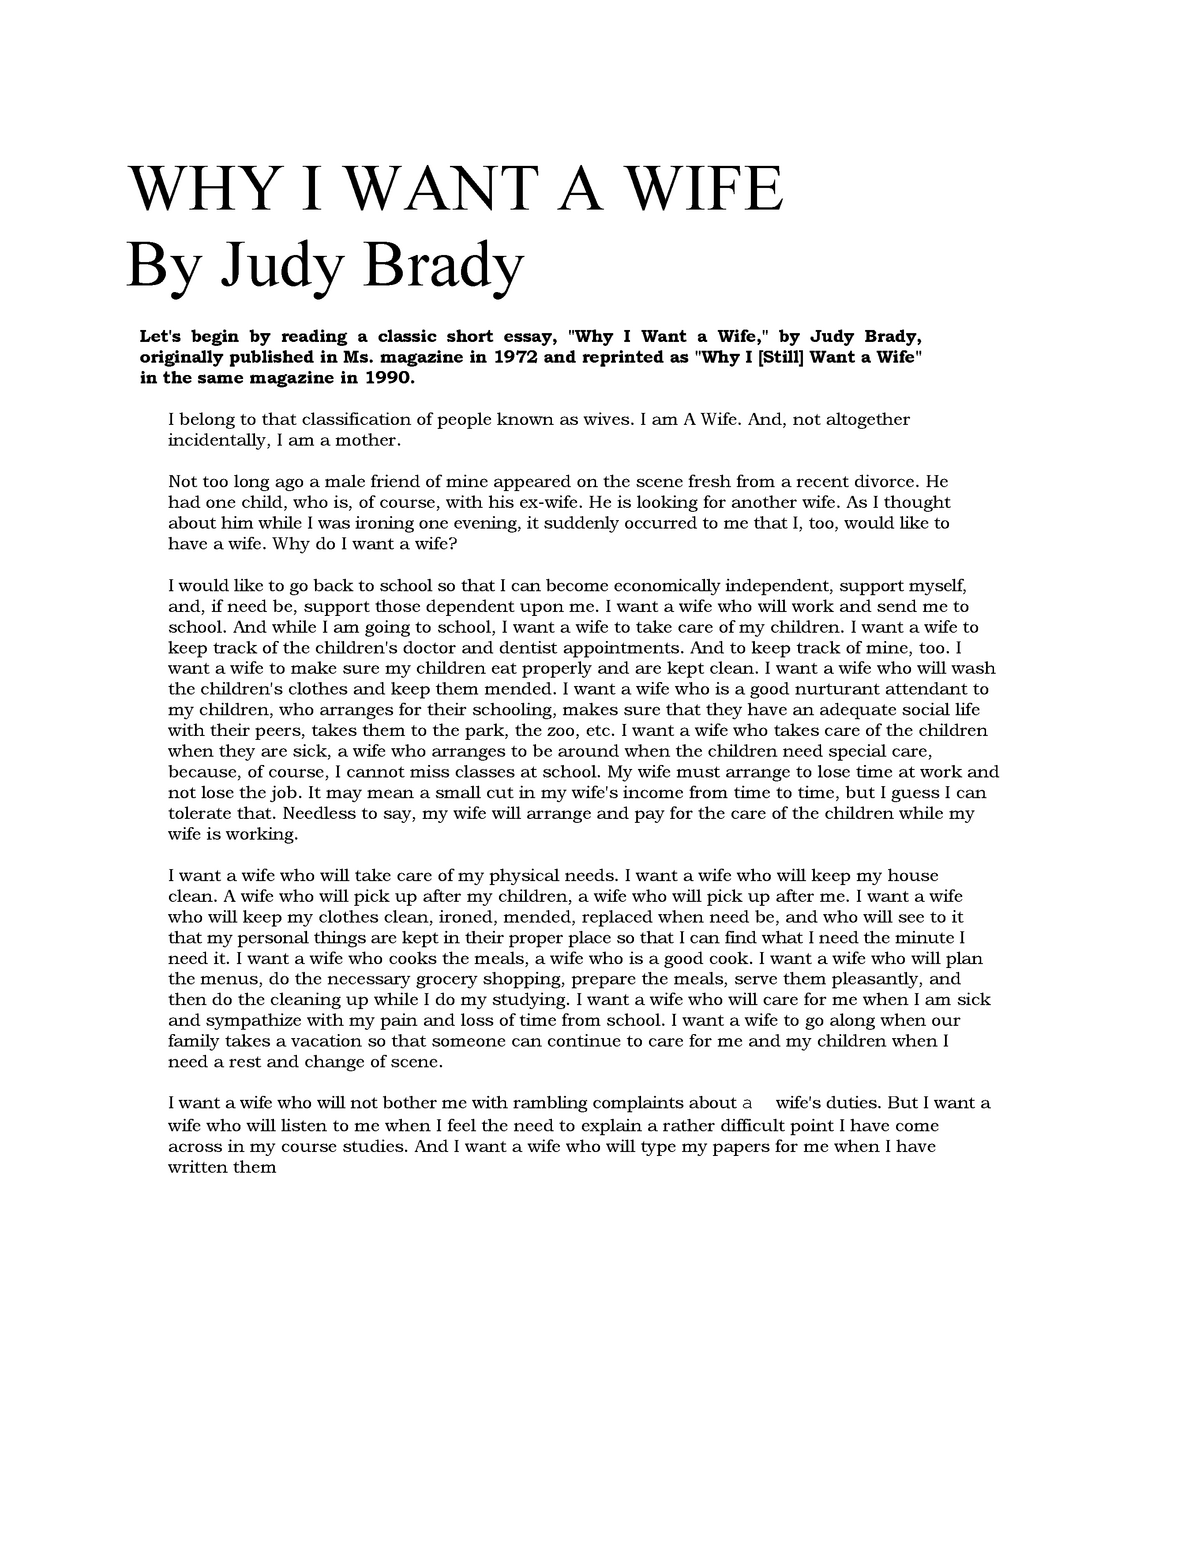 Sample Story WHY I WANT A WIFE SHORT STORY. EXAMPLE ESSAY ...